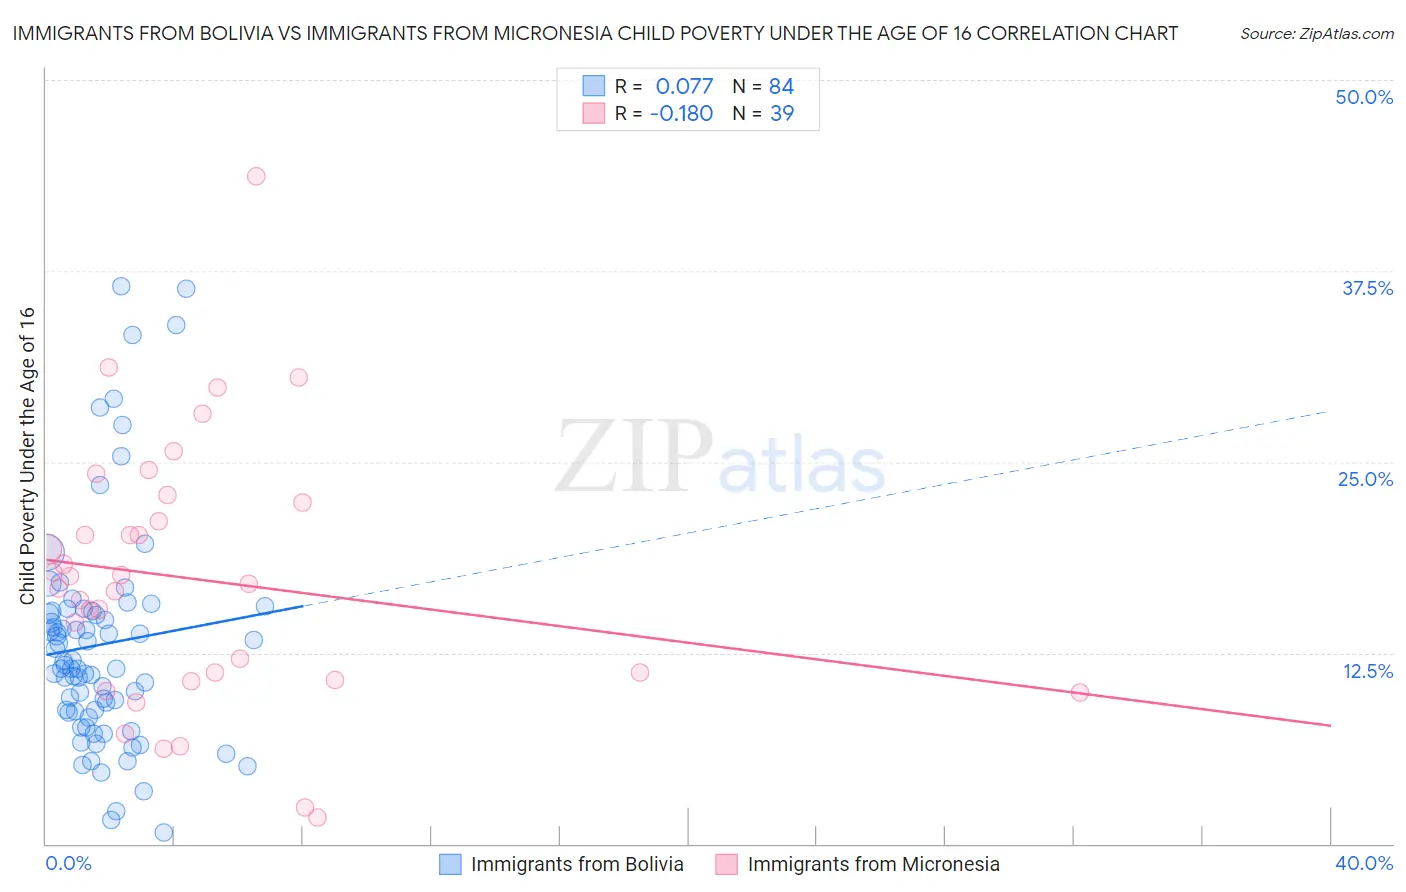 Immigrants from Bolivia vs Immigrants from Micronesia Child Poverty Under the Age of 16